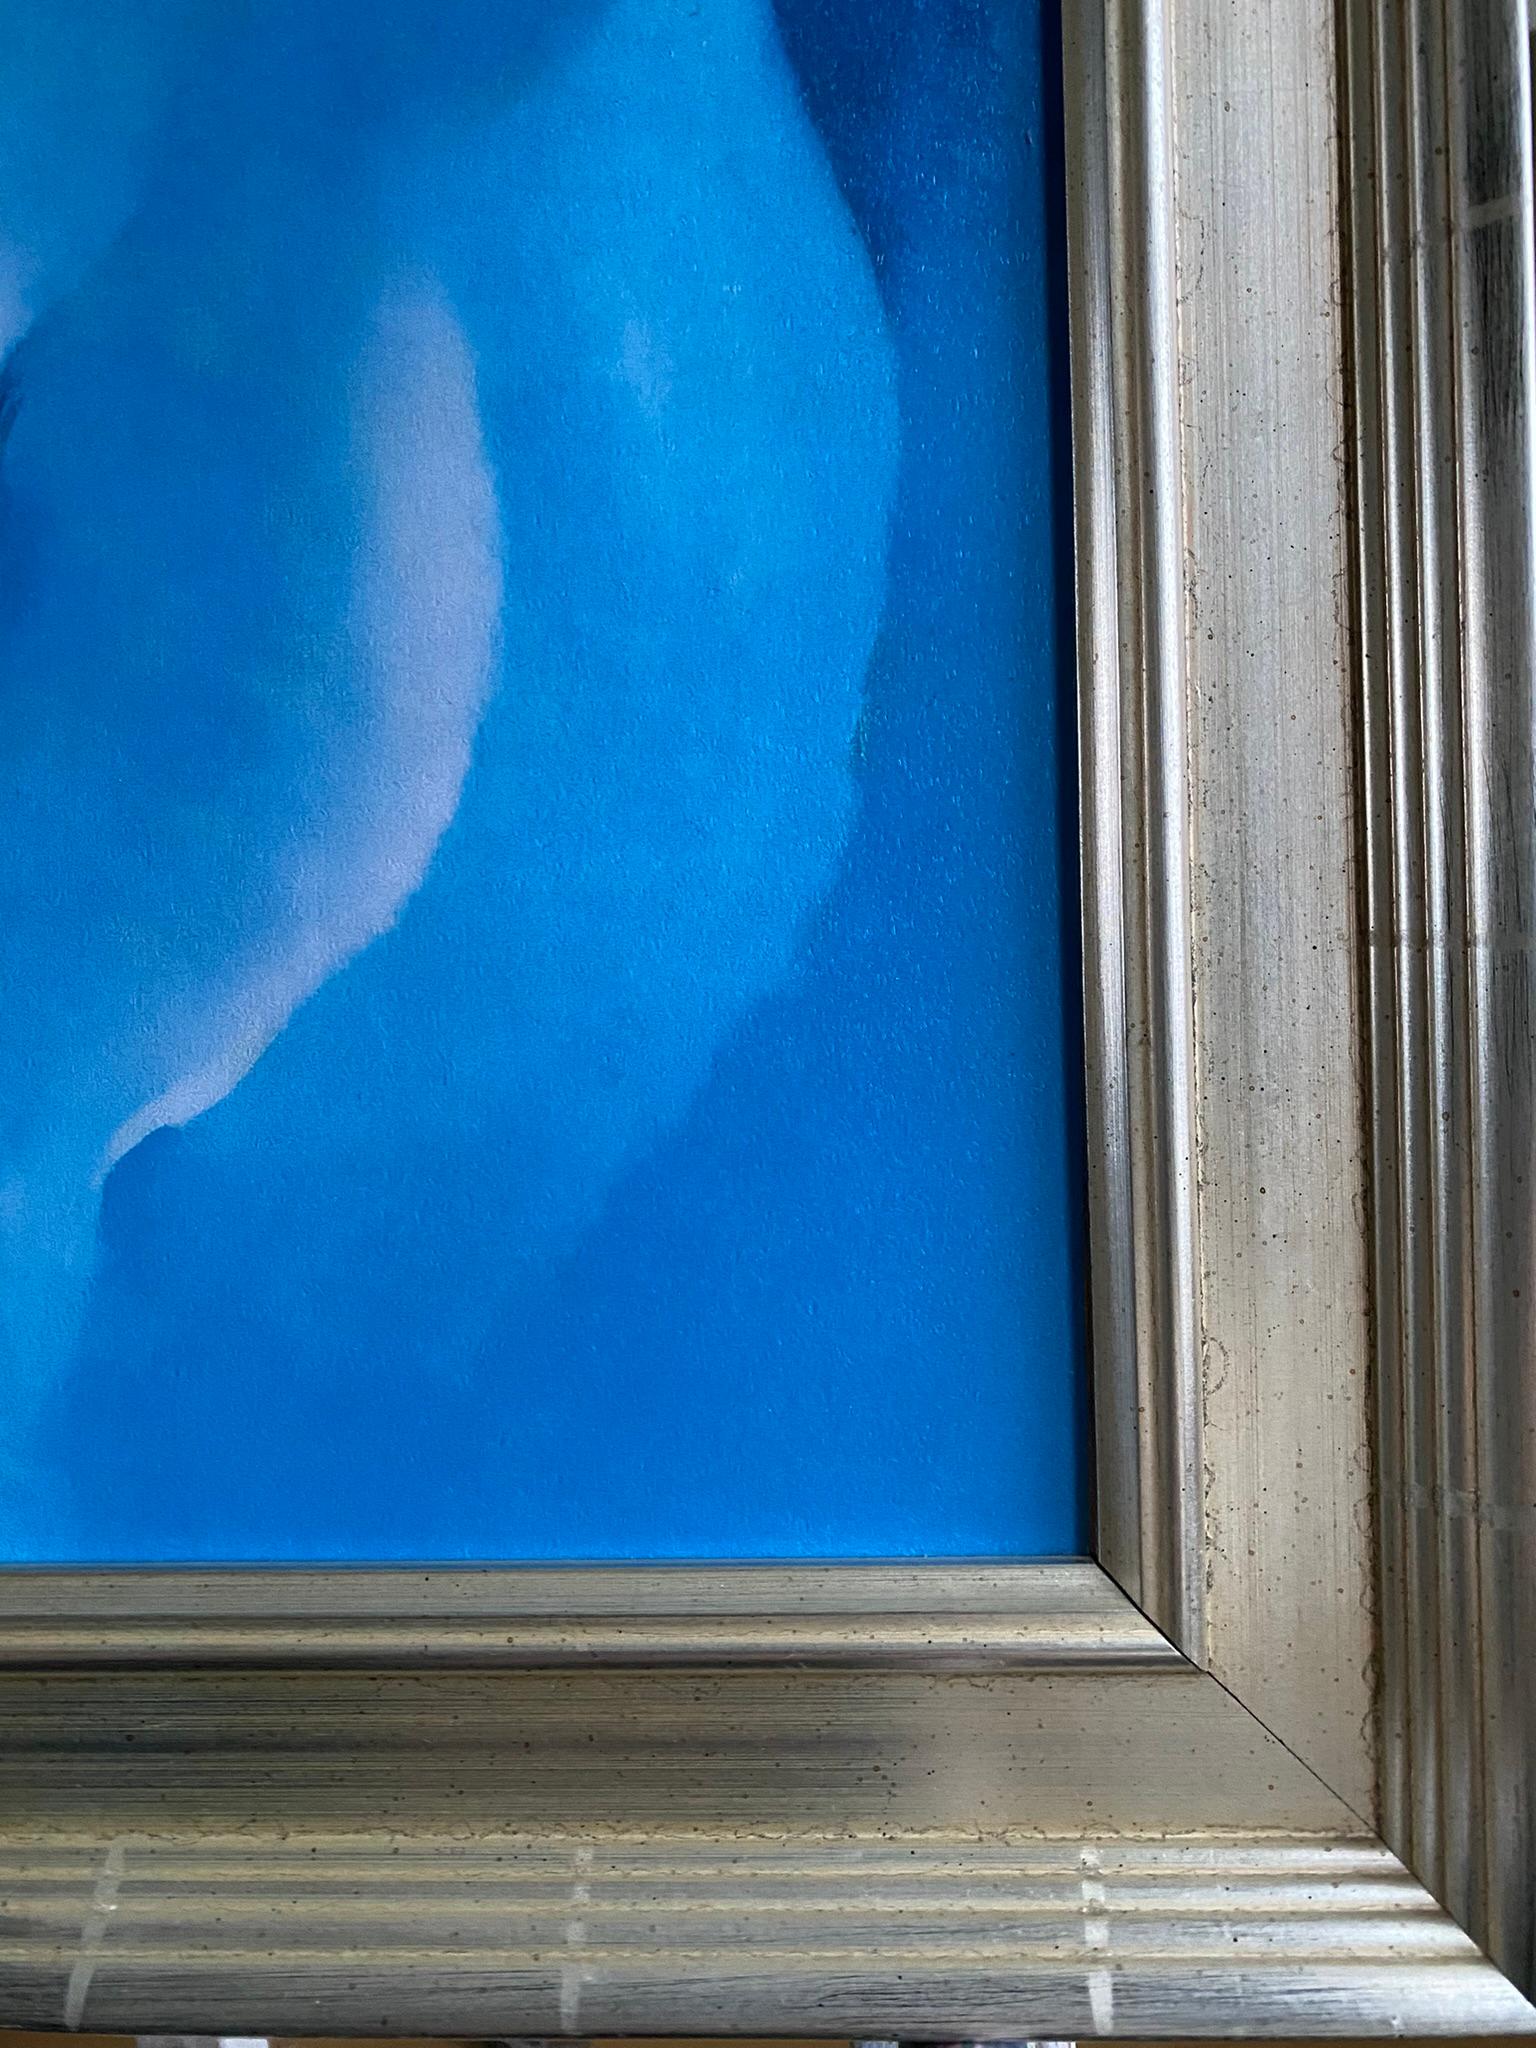 Georgia O'Keeffe-High Quality print by MoMA circa1997-Abstraction Blue-GSYStudio For Sale 17